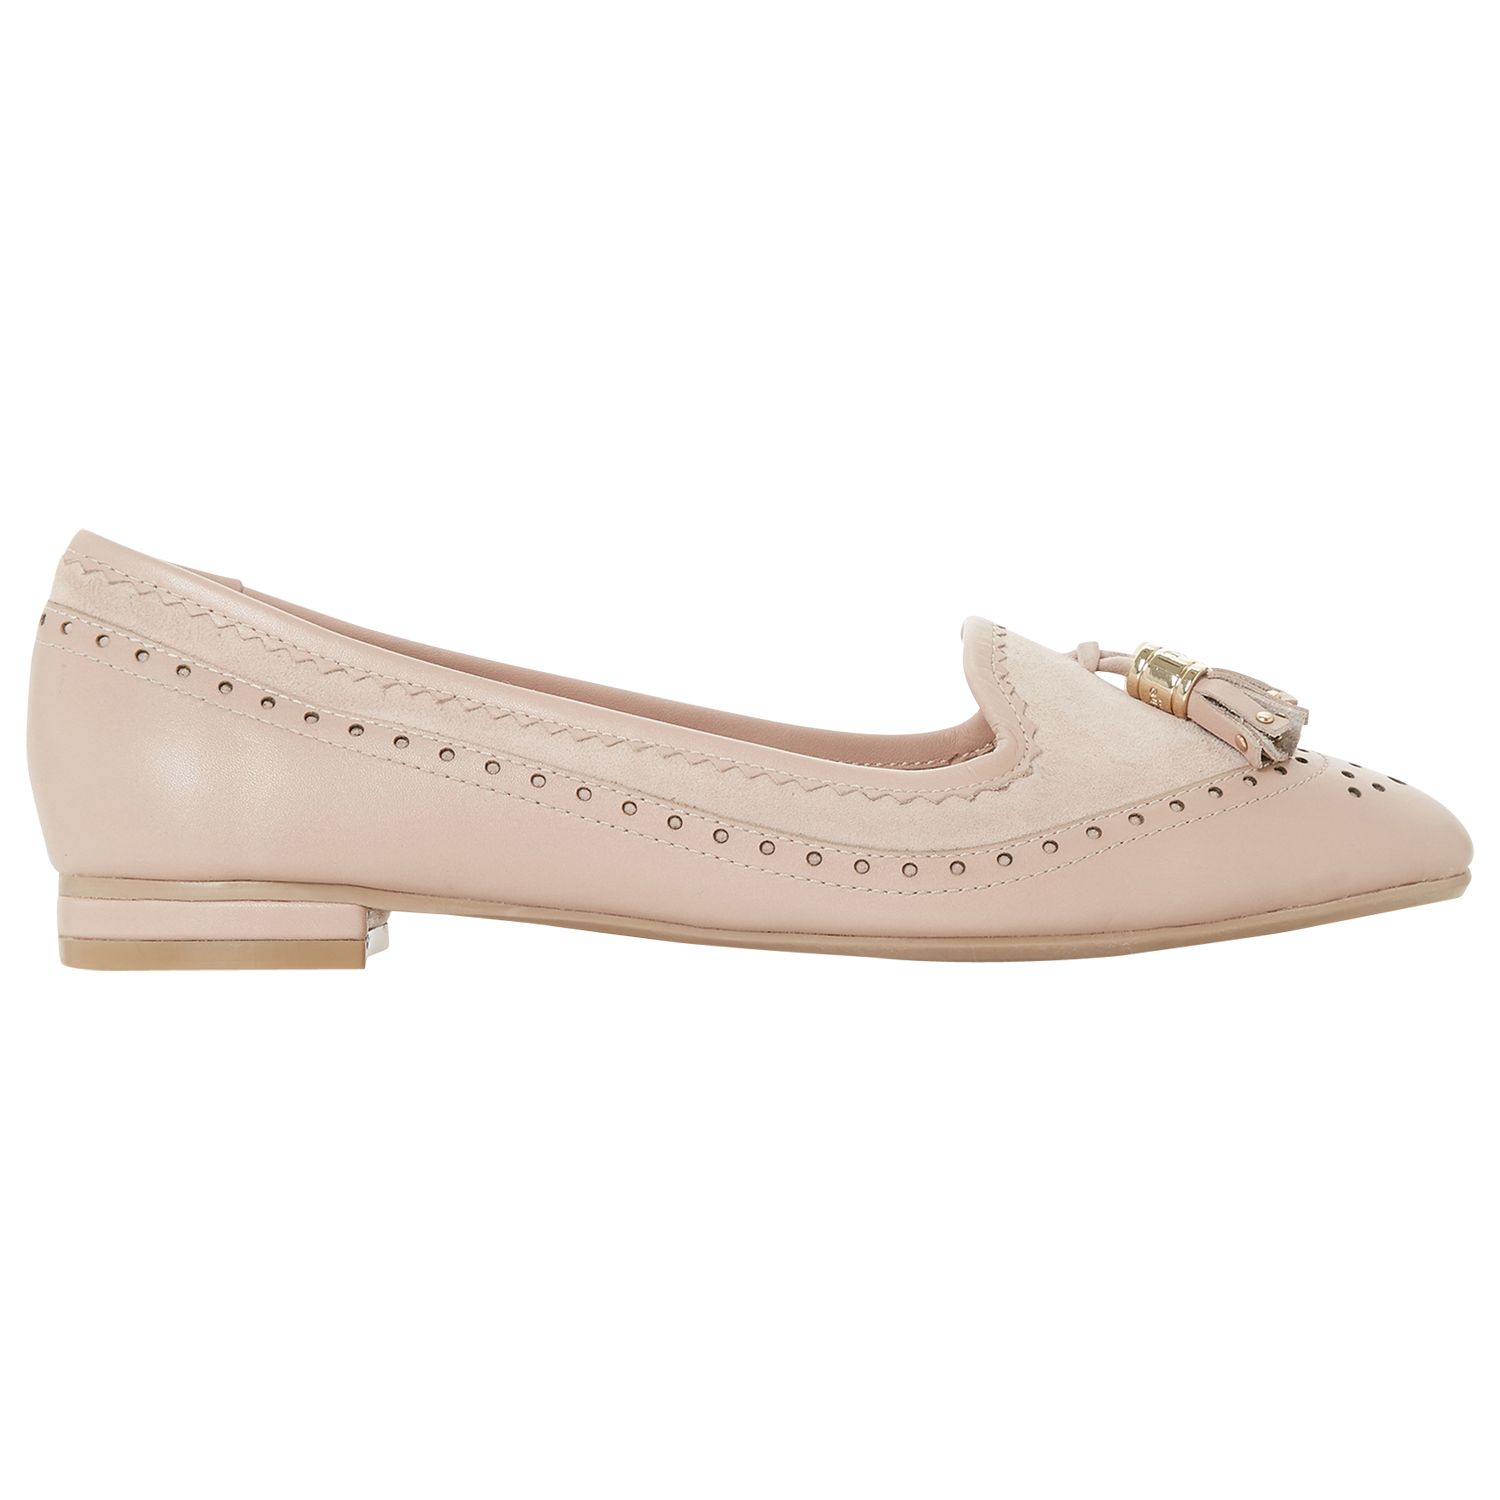 Dune Gambie Leather Loafers, Blush, 3